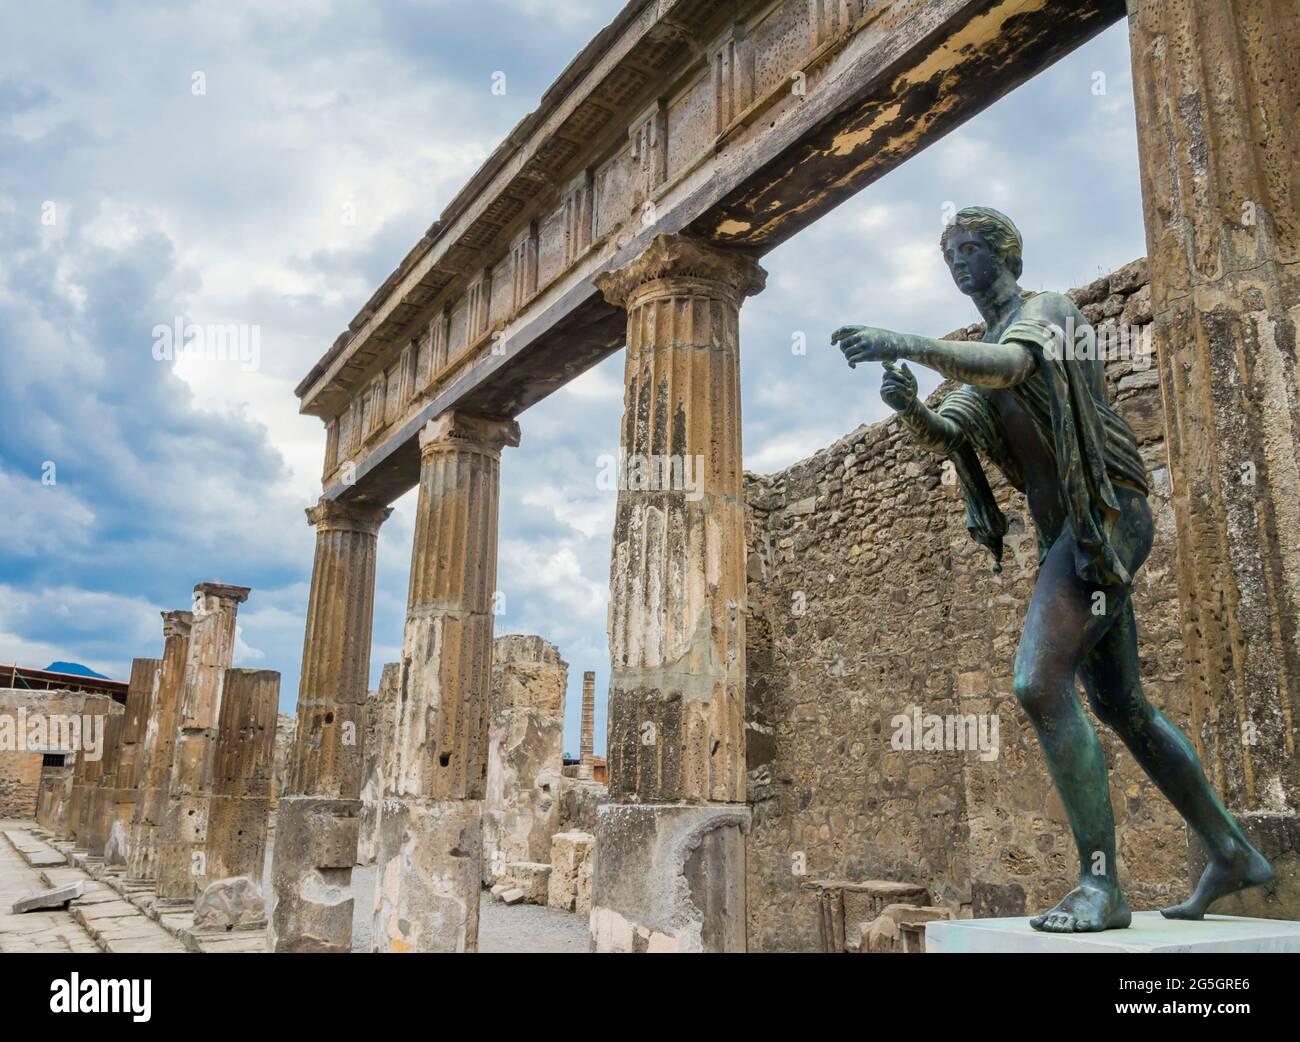 Magnificent bronze statue depicting an old Roman citizen in the archaeological site of Pompeii, ancient city destroyed by eruption of Mount Vesuvius i Stock Photo